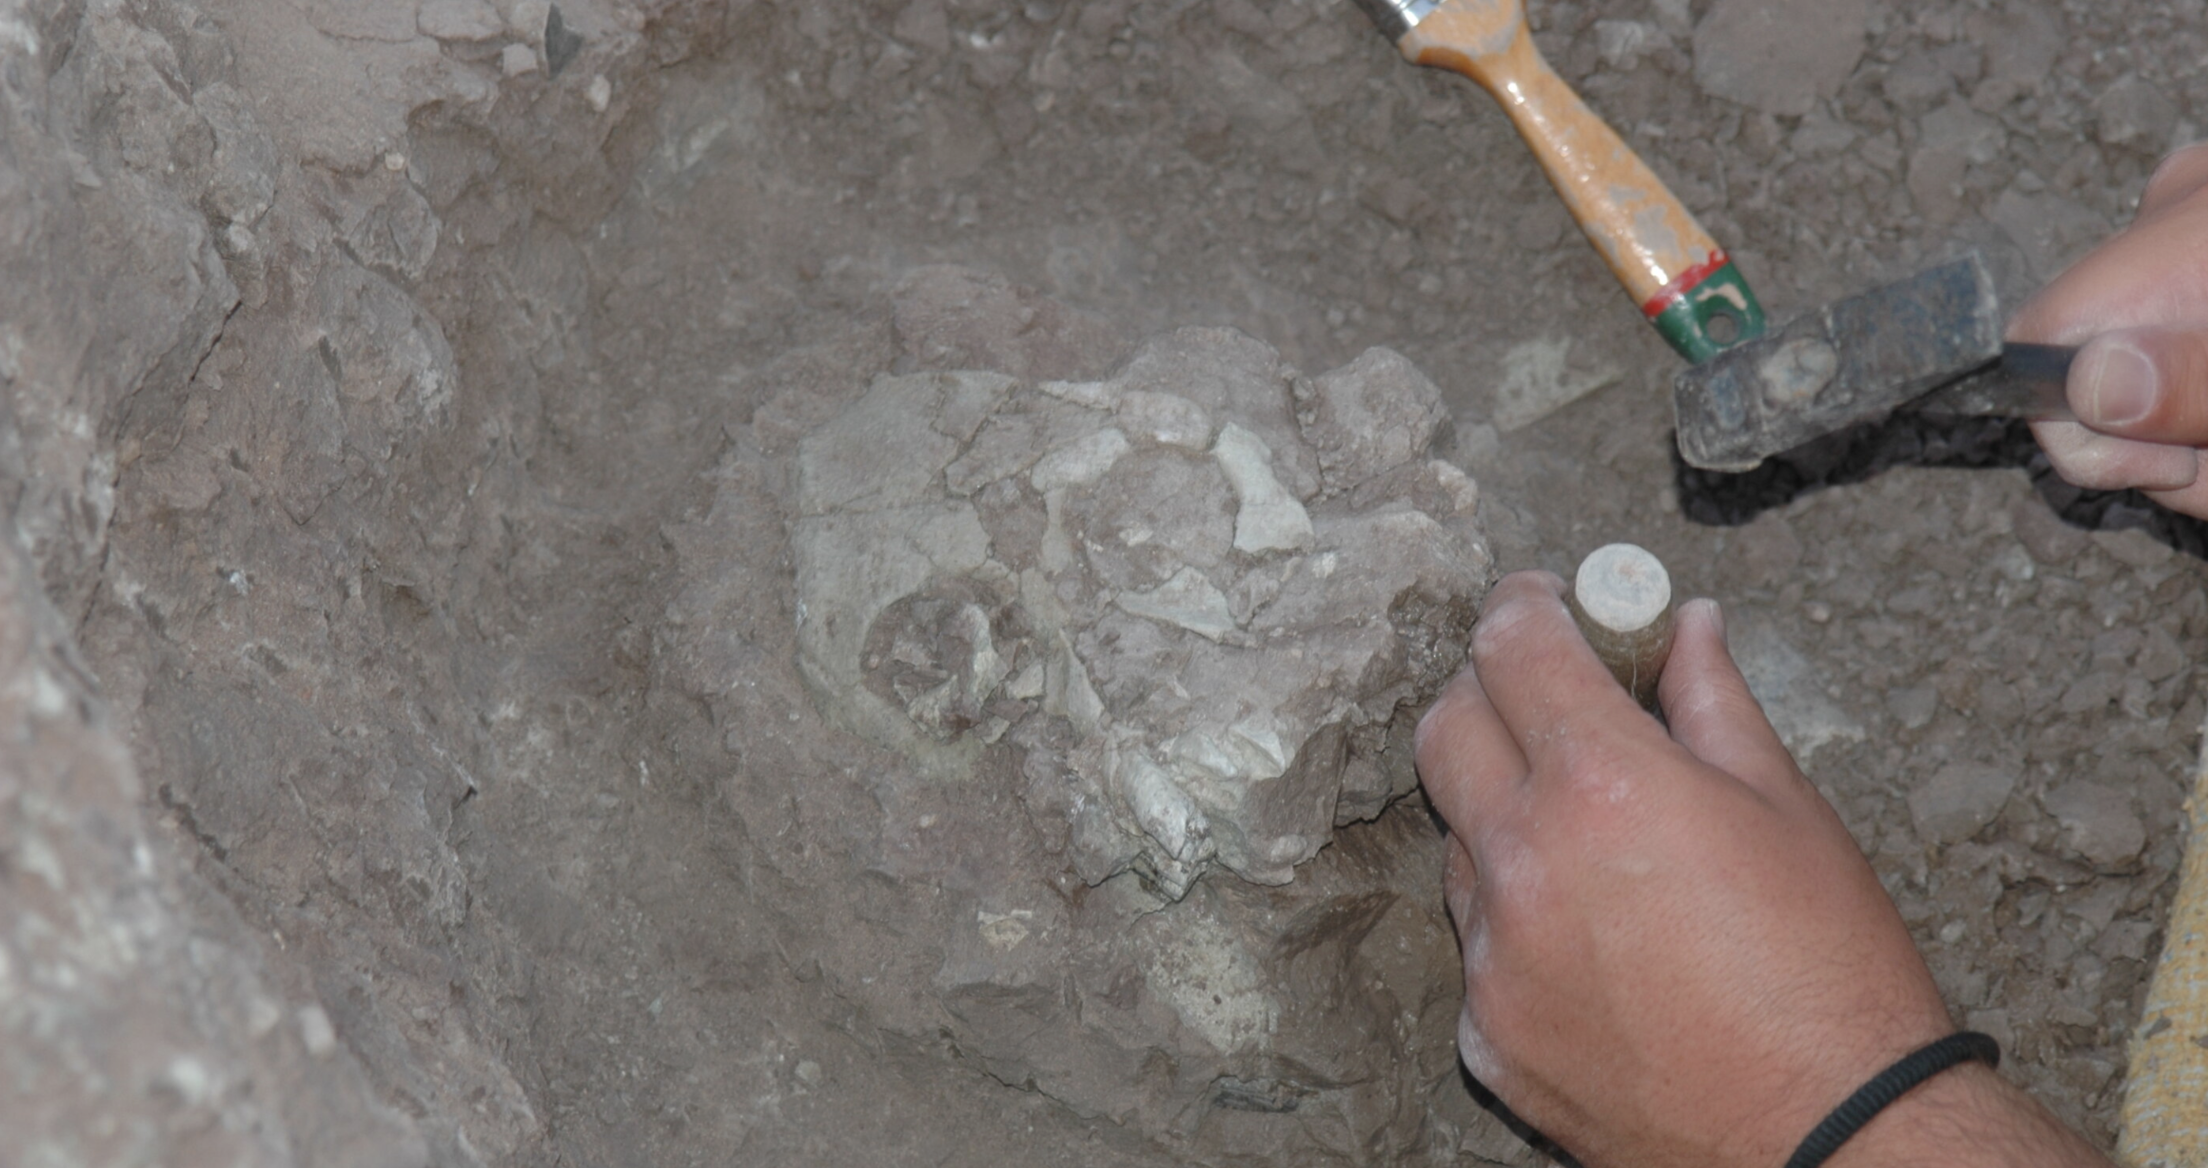 An archaeologist excavating a fossil.